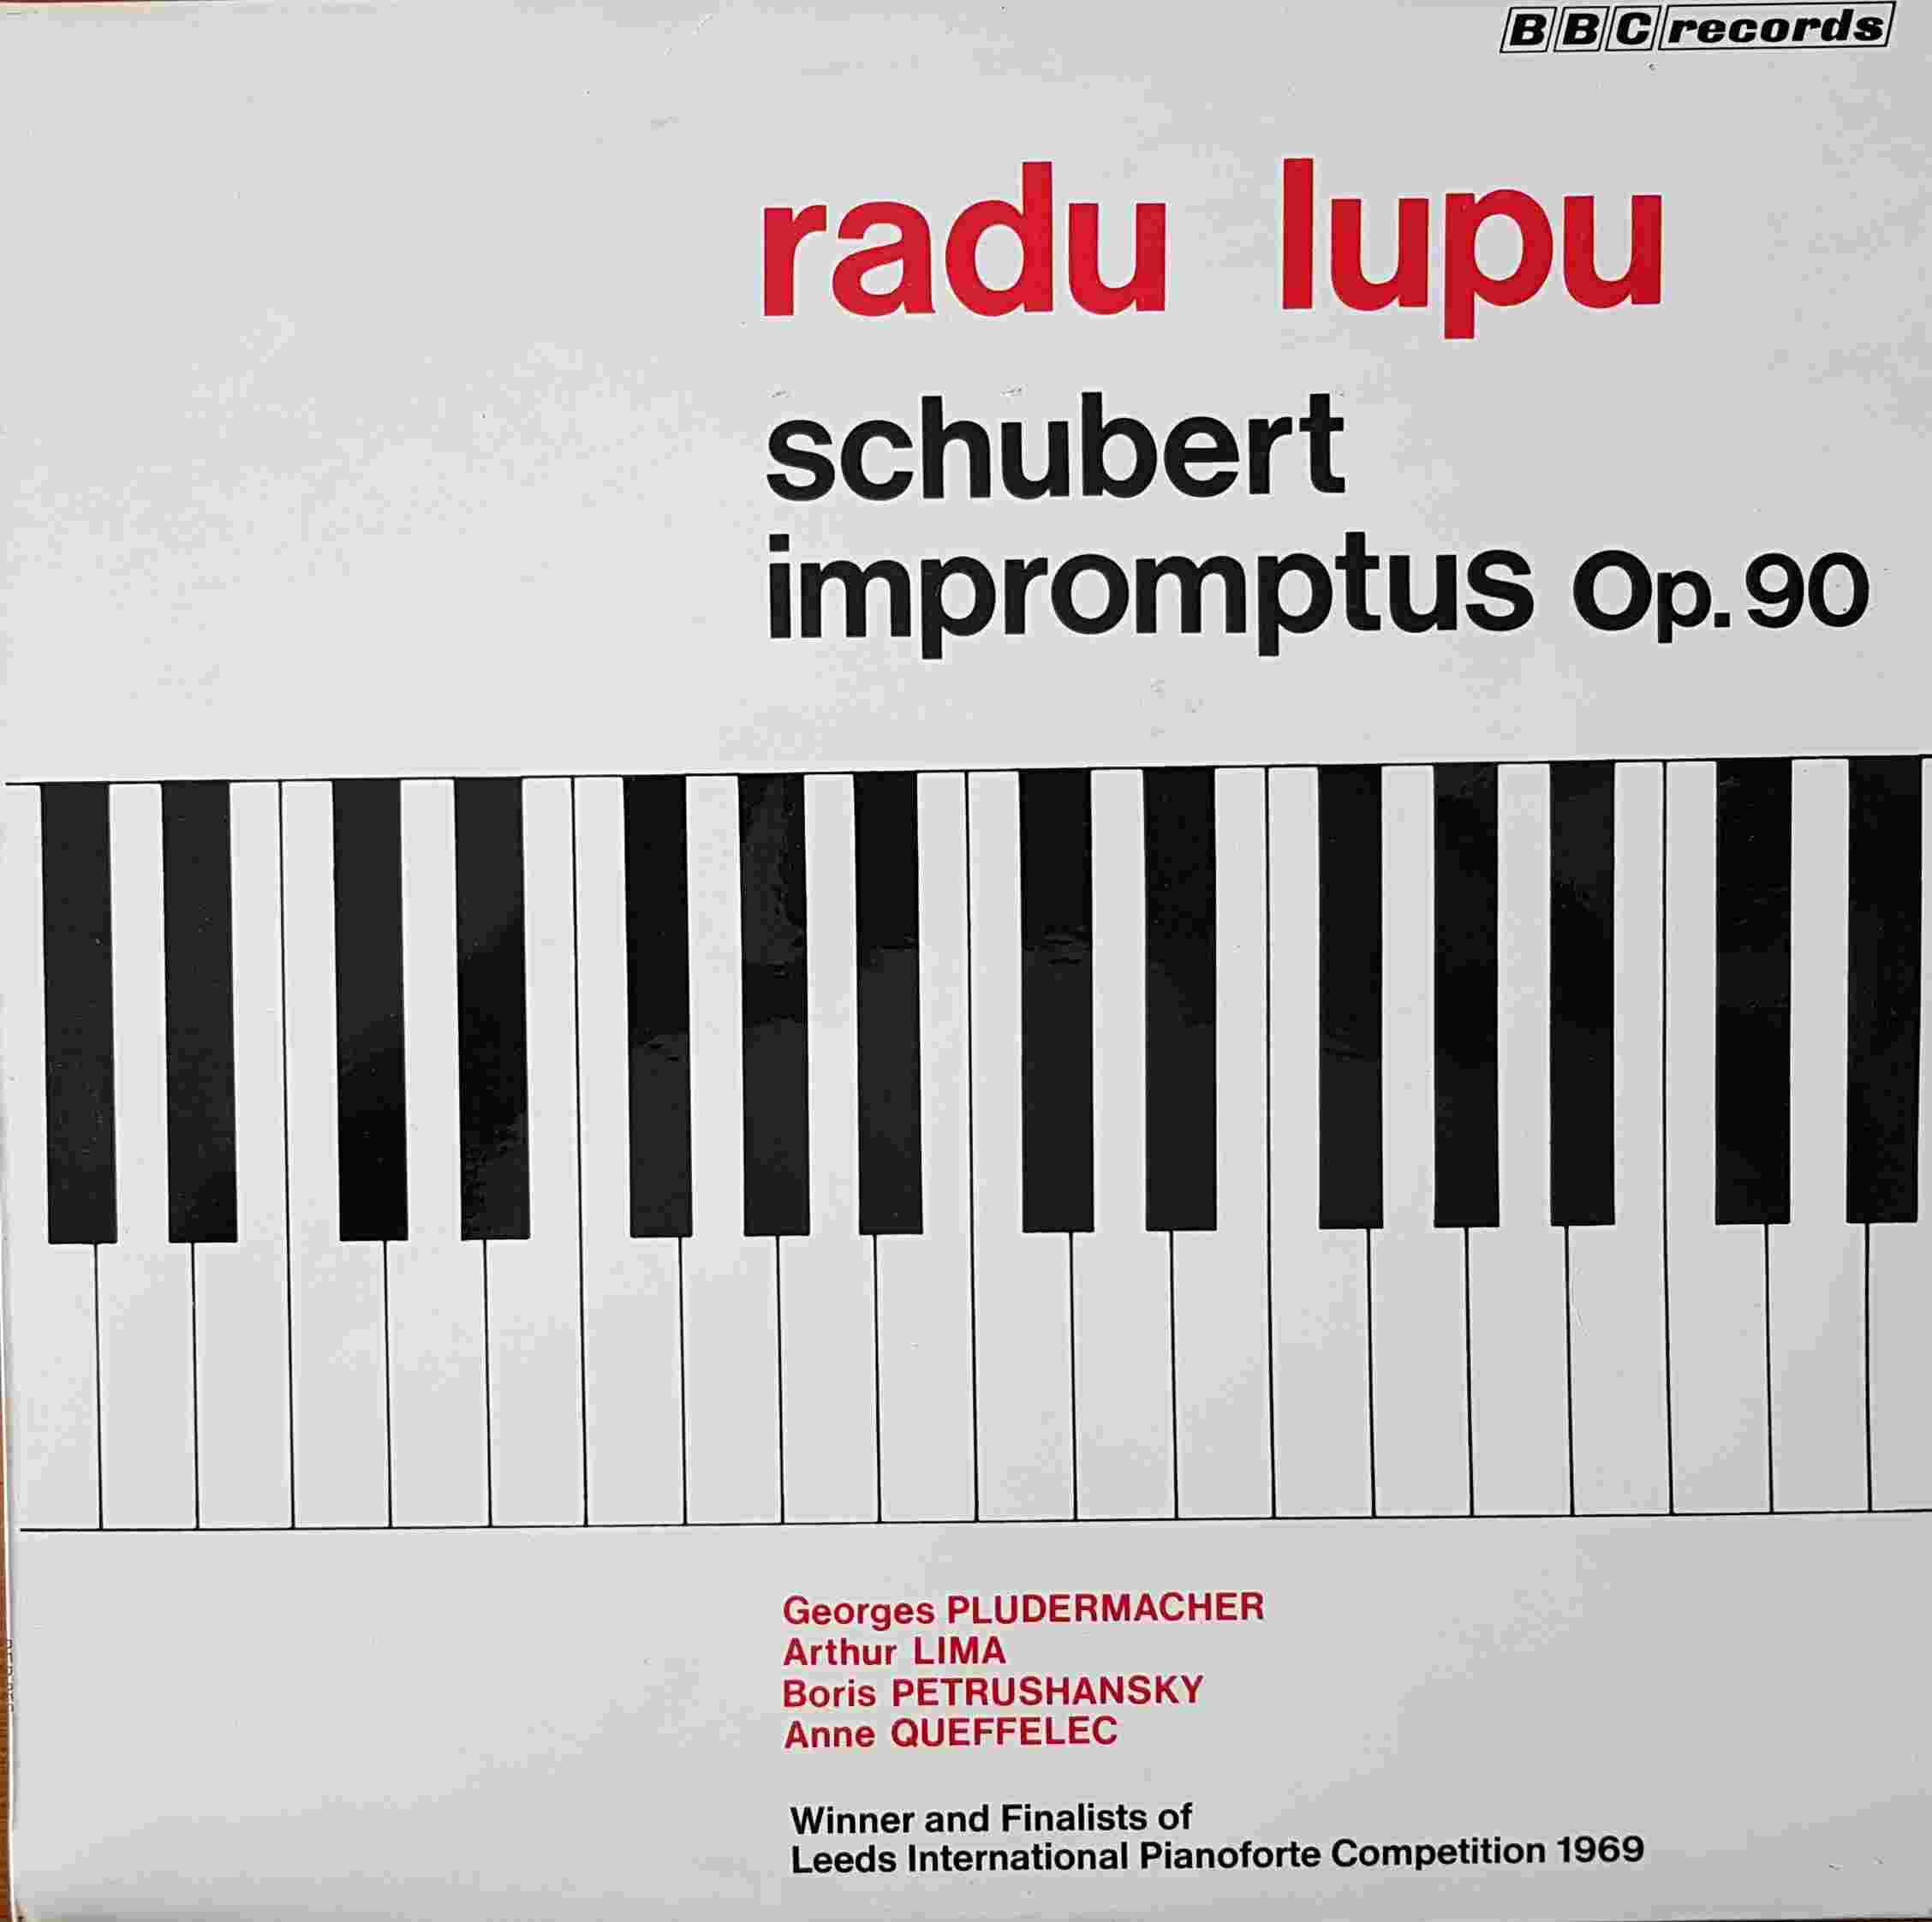 Picture of REB 85 Radu lupu - Schubert sympromptus op. 90 by artist Schubert from the BBC albums - Records and Tapes library